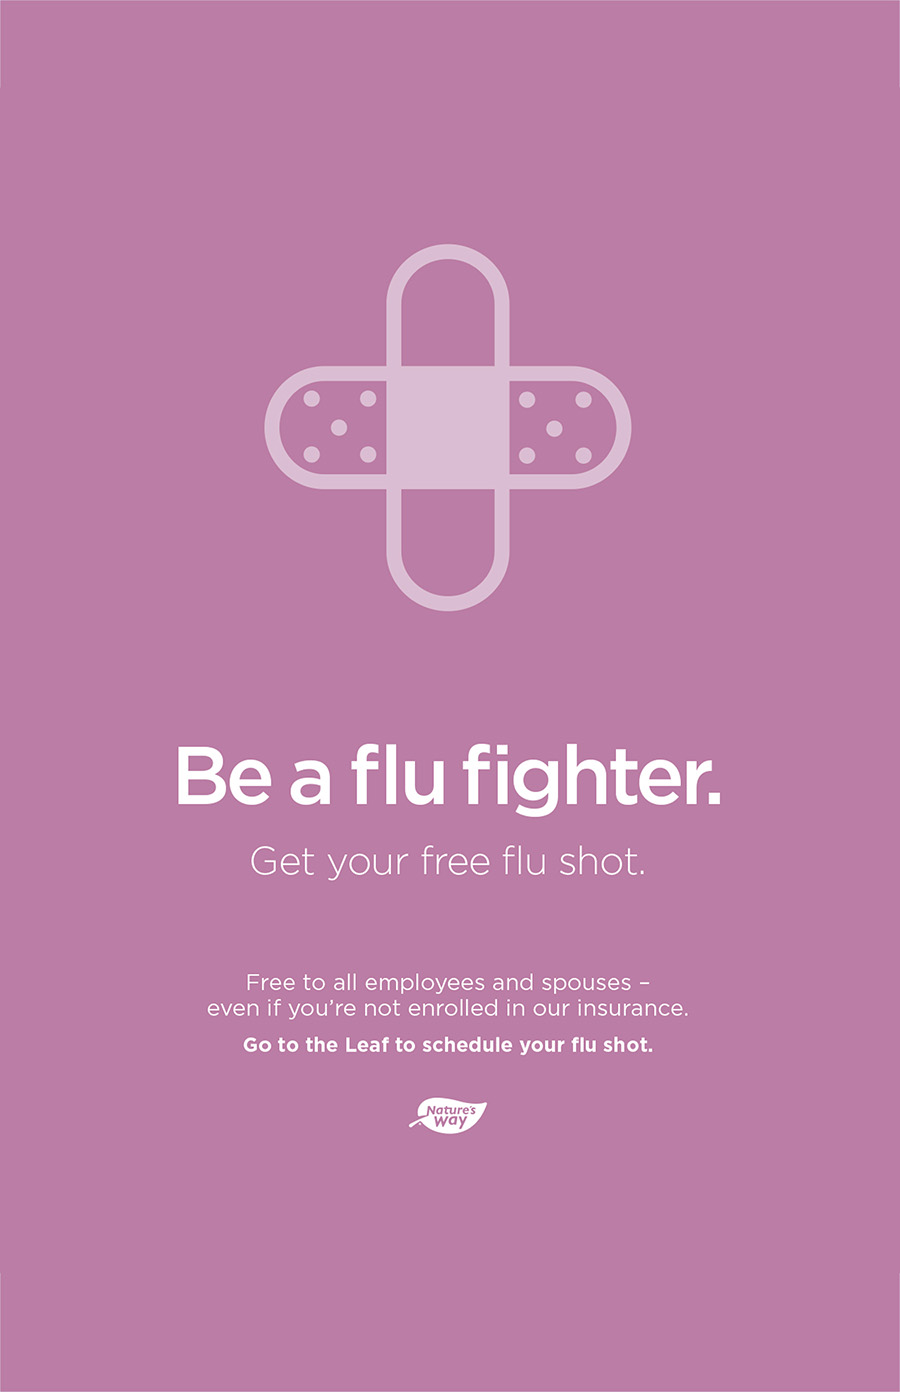 Natures Way Poster - Be a flu fighter.